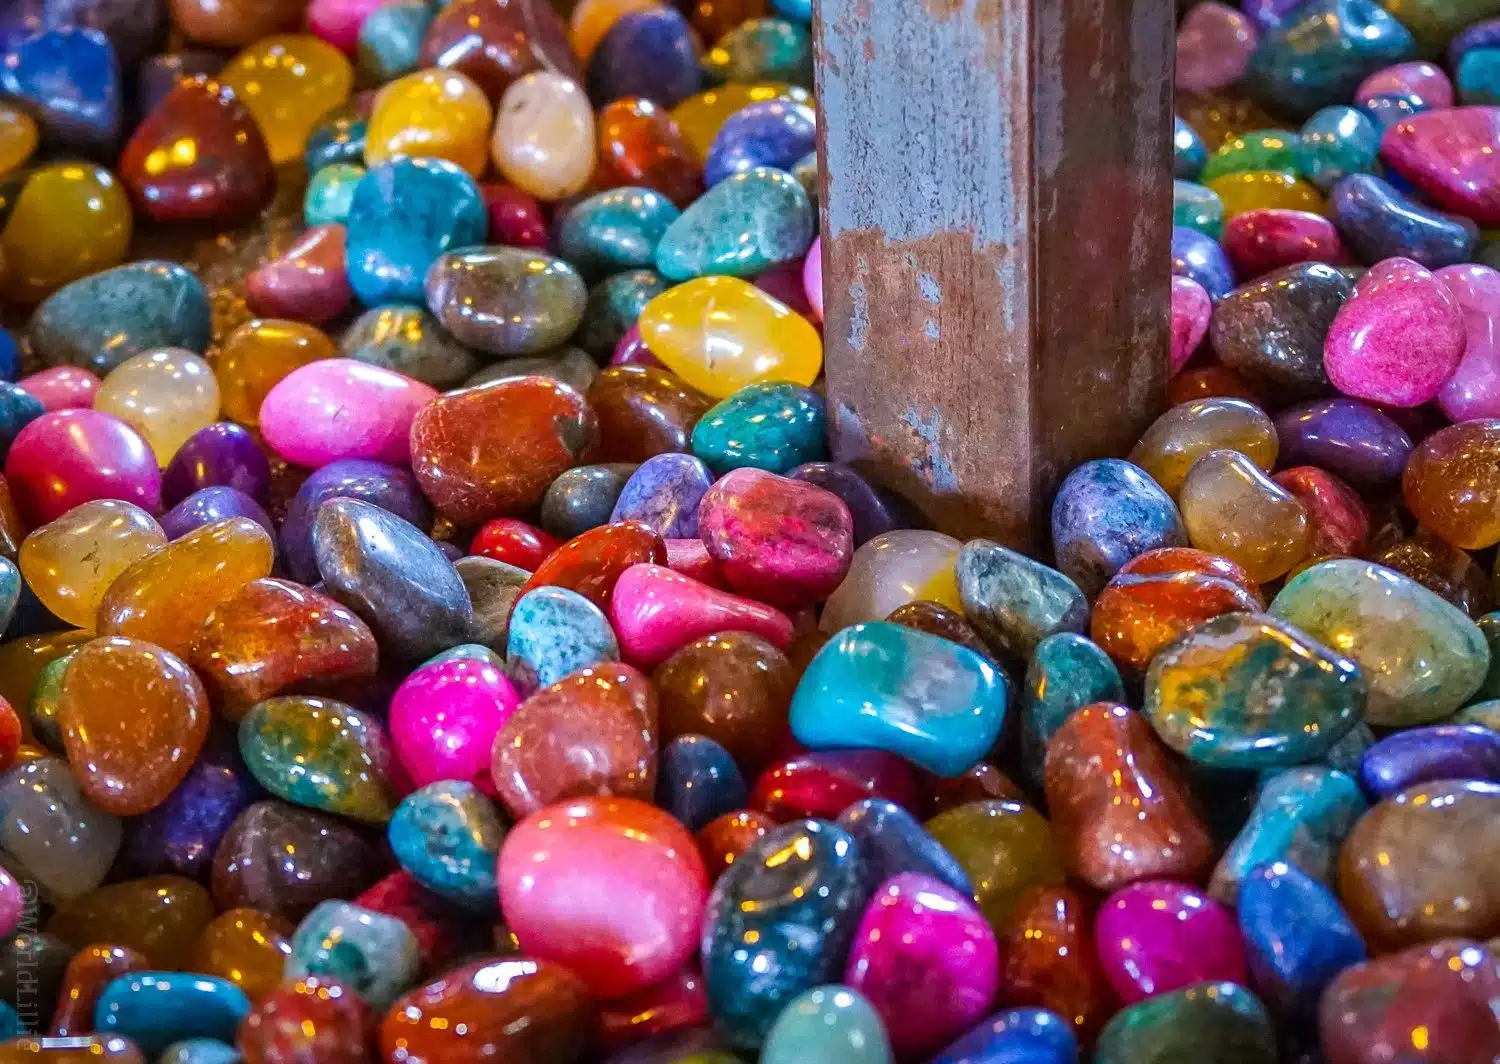 Rainbow colored rocks in an Ohiopyle country store.